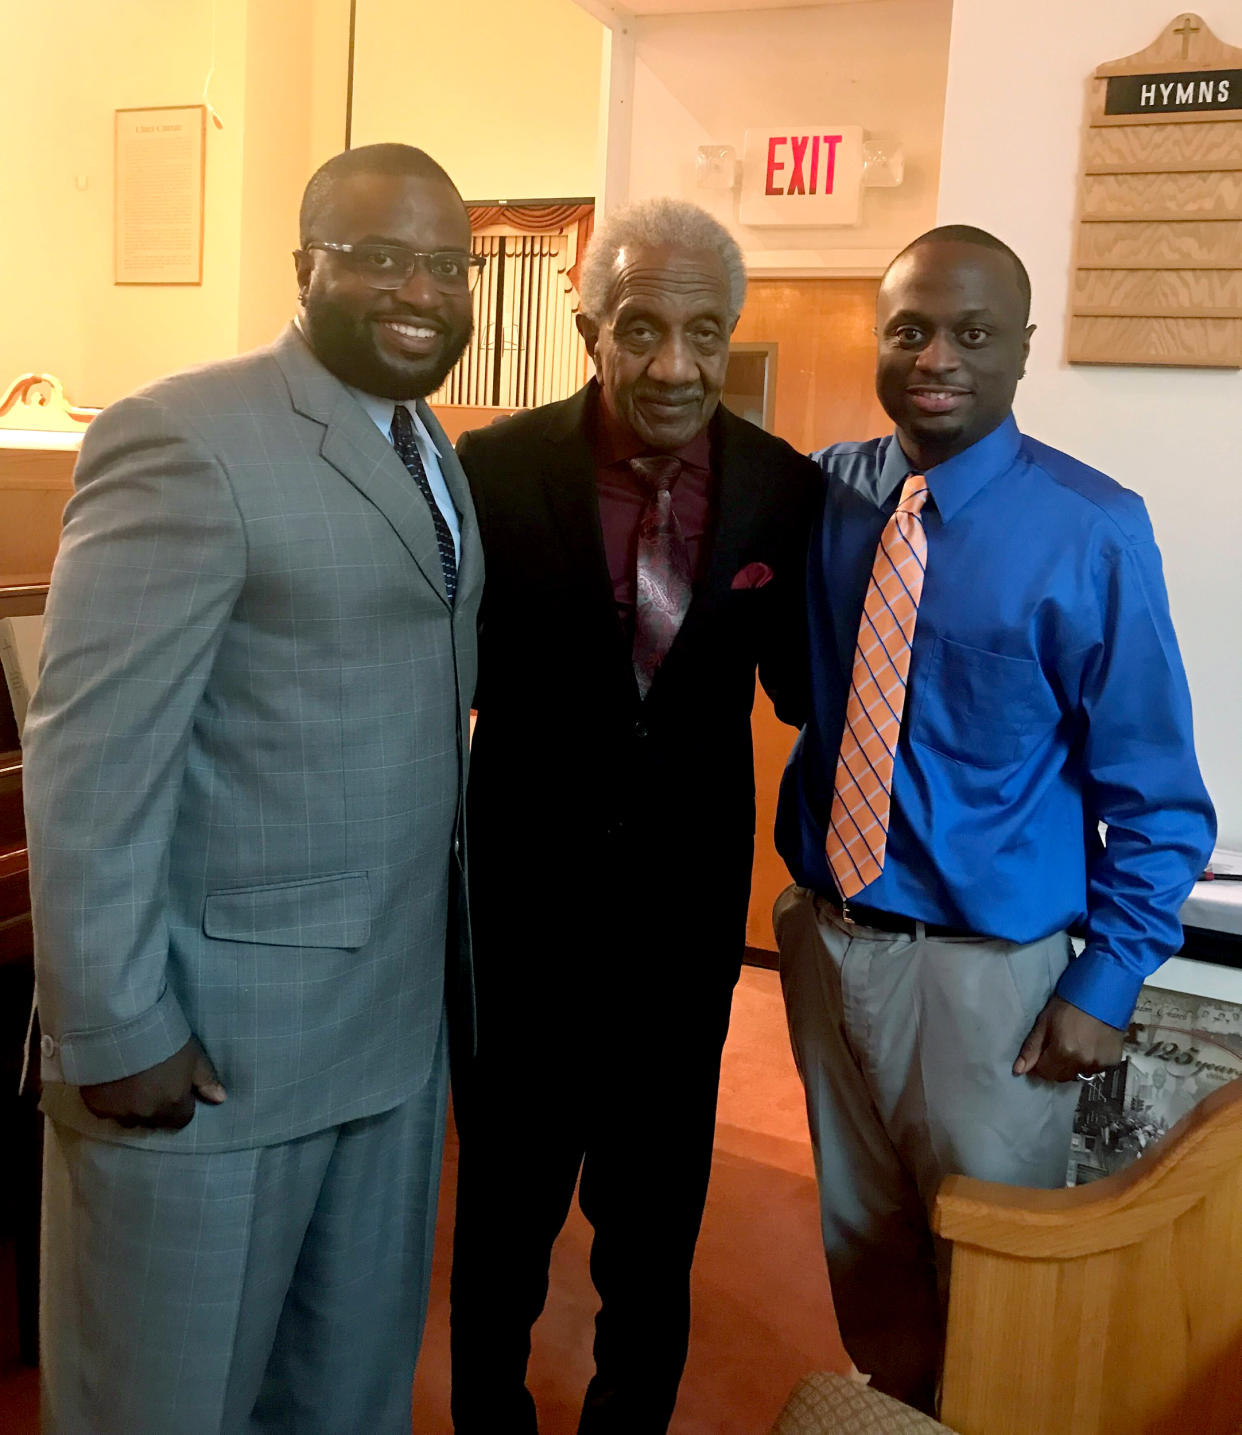 Alan Reese, left, and Marvin Reese with their grandfather F.D. Reese, center, in church. (Family photo)